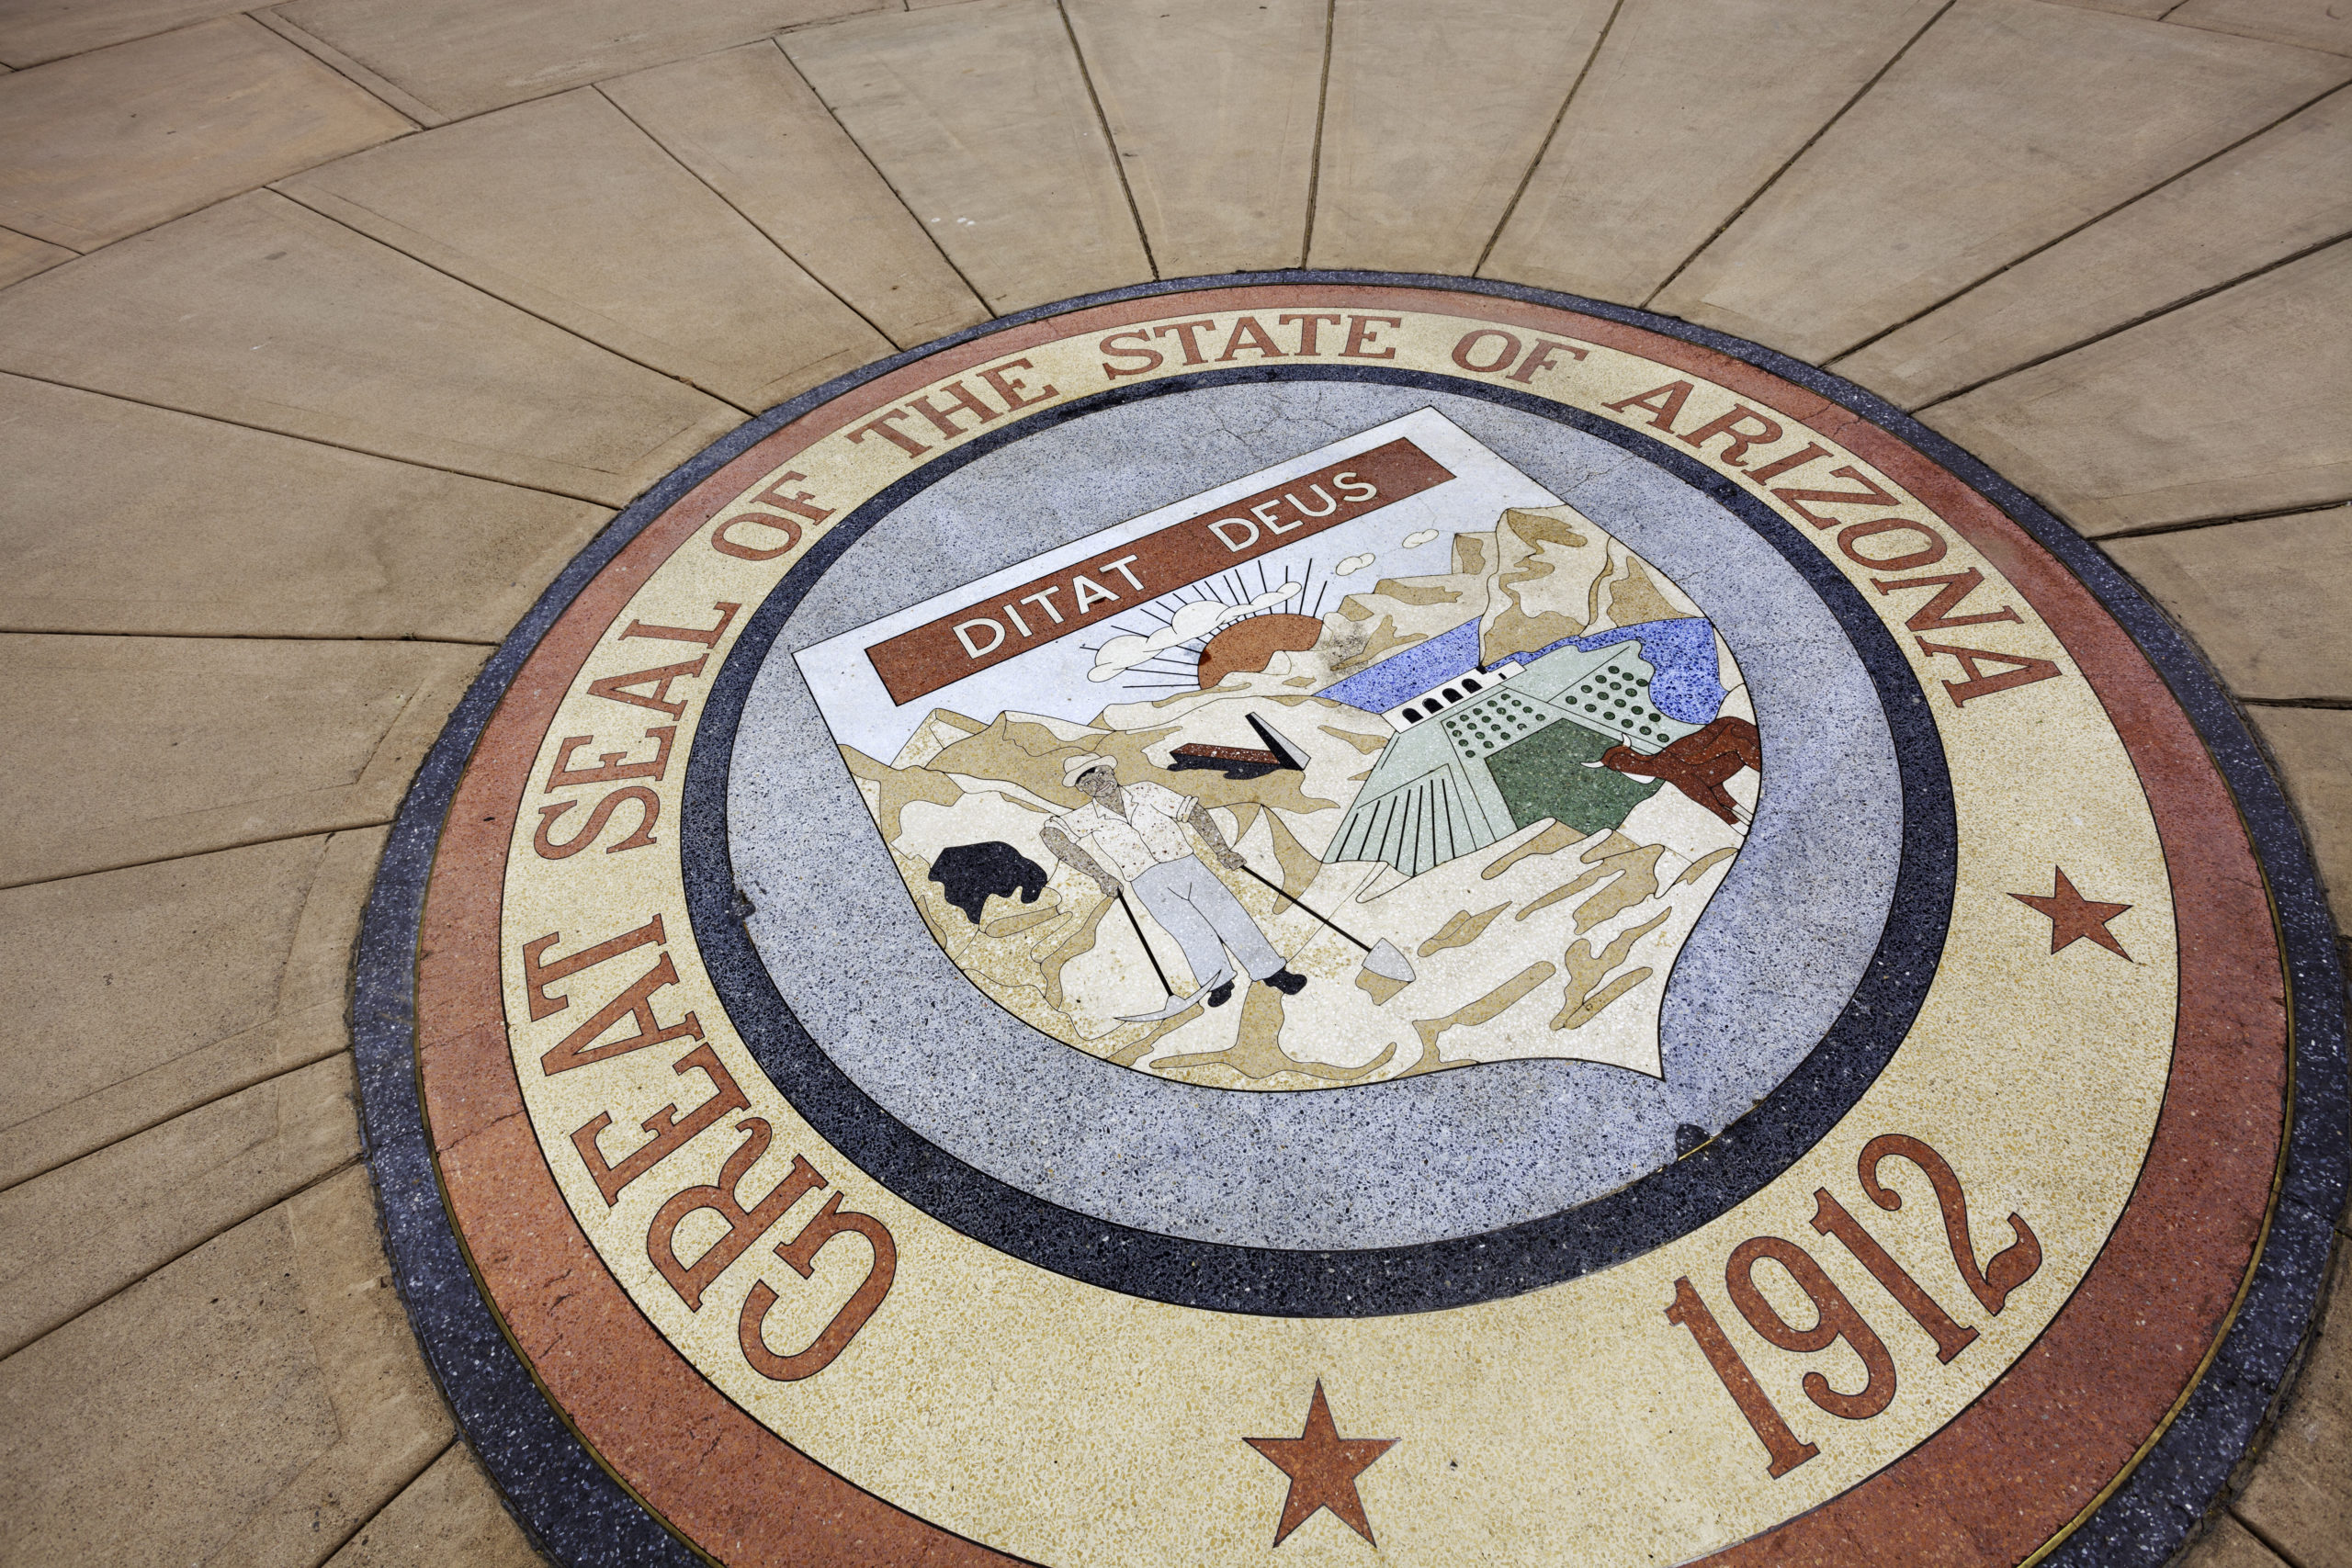 A picture of the Great Seal of the State of Arizona